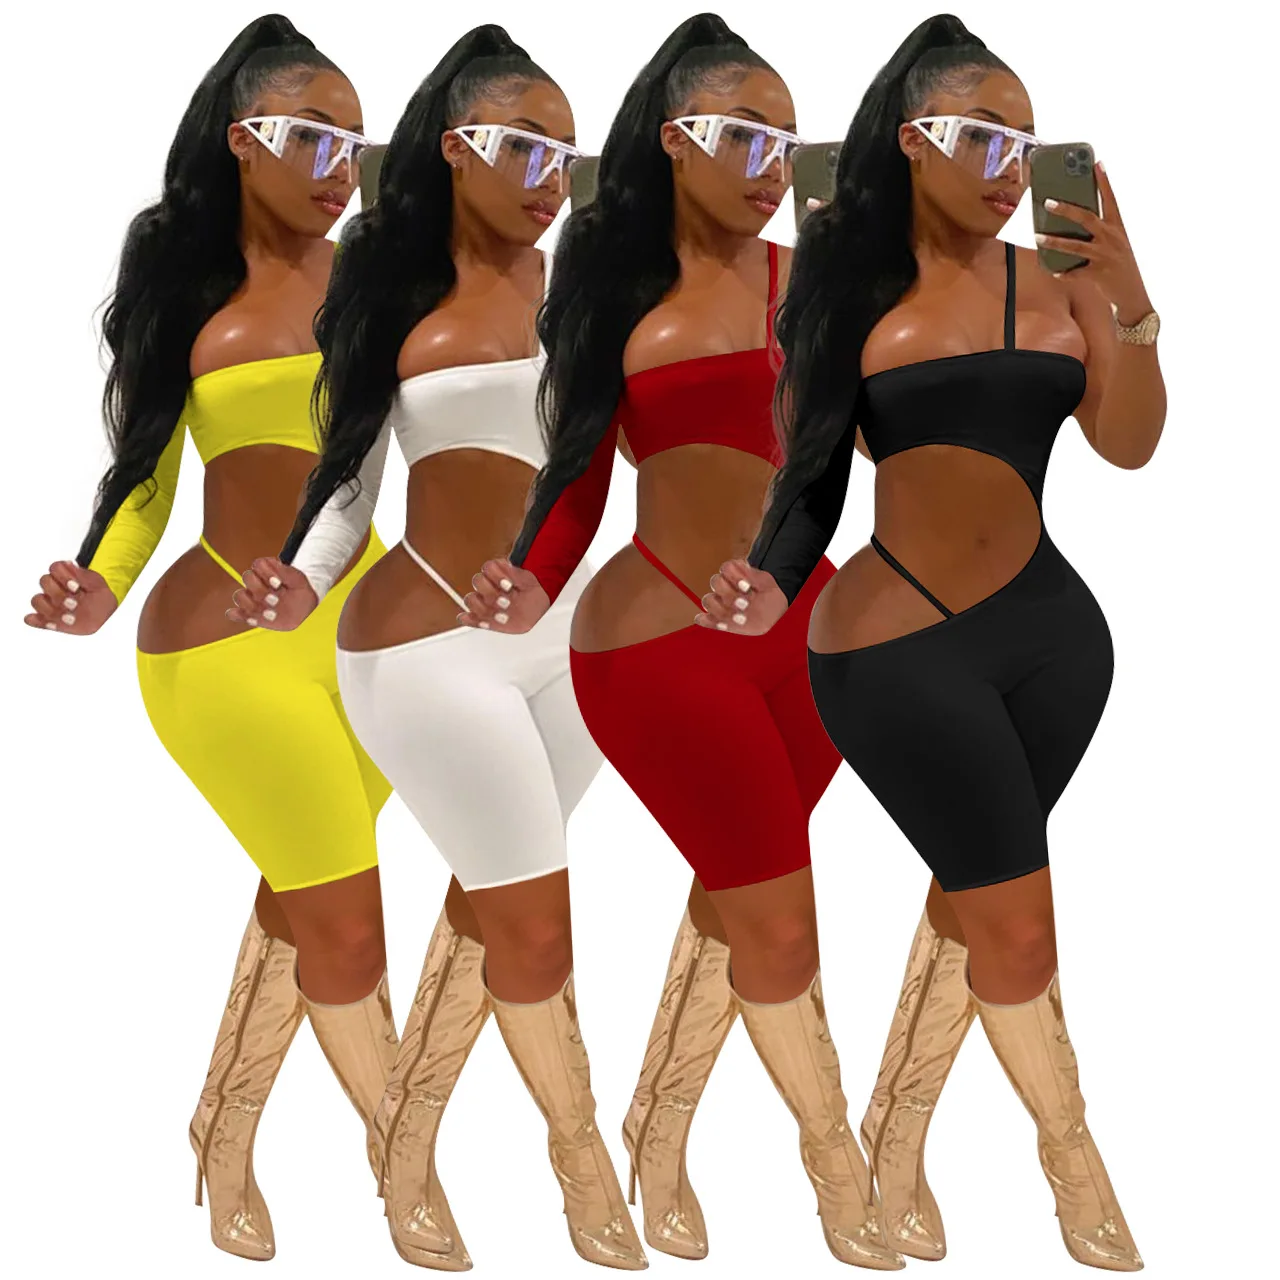 

2022 New Design Women Sexy Midriff-baring Outfits Waist Summer Sleeveless Bodycon Shorts Jumpsuit Without Underwear, Customized jumpsuits women